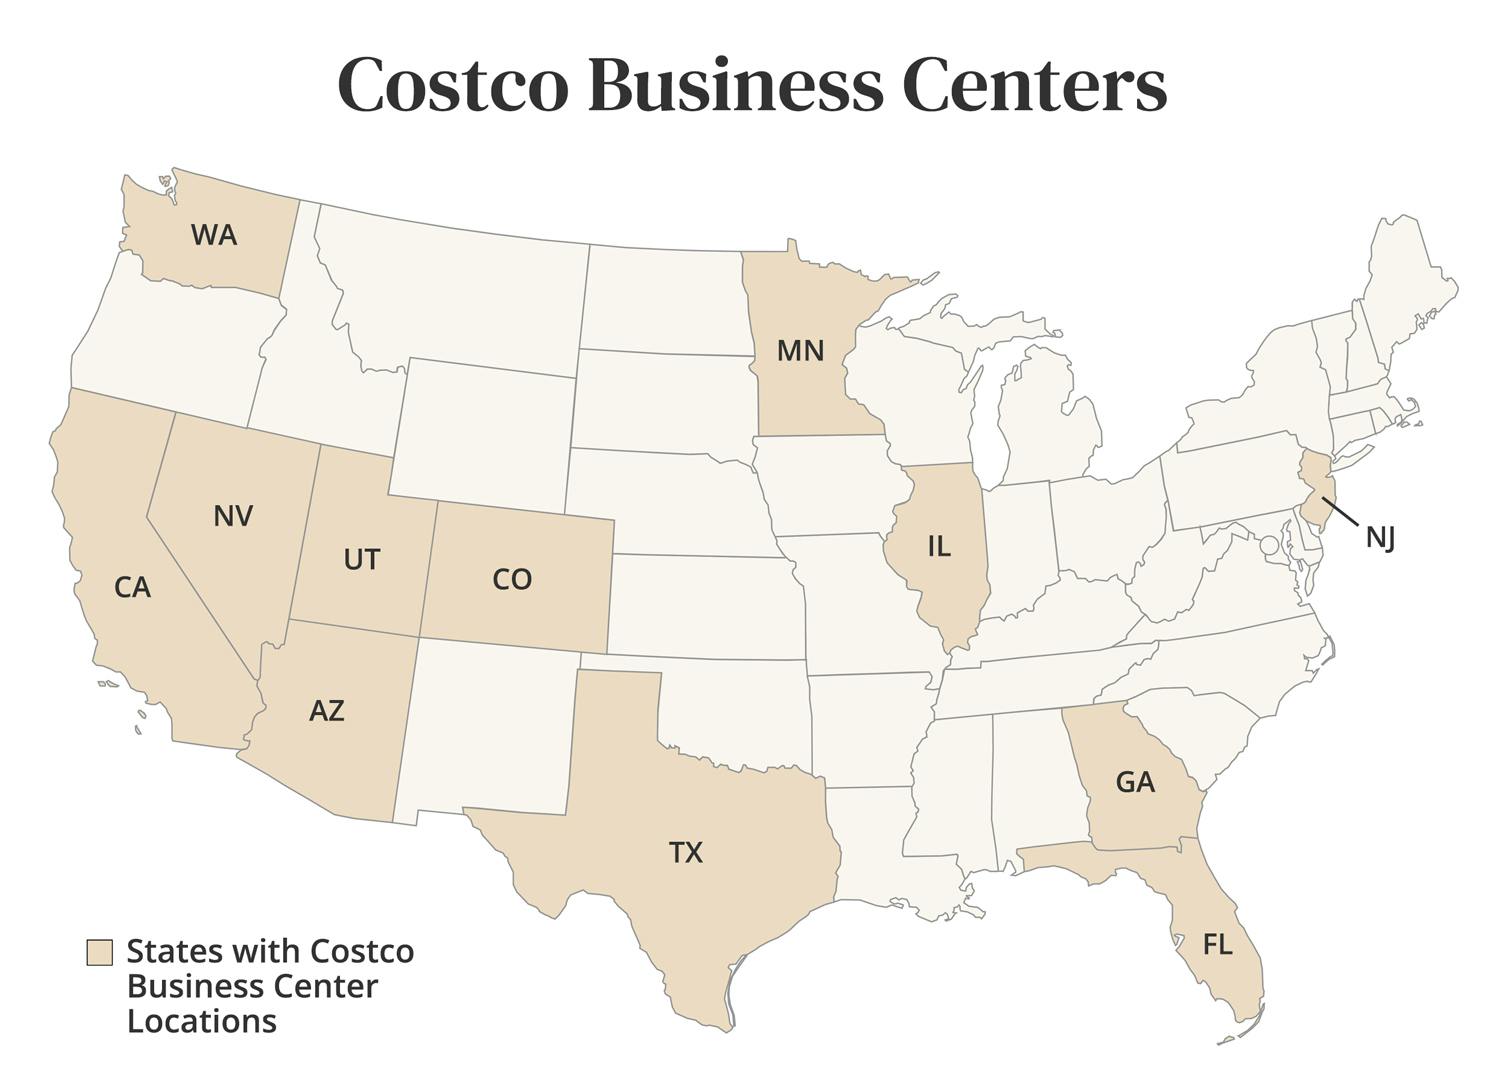 Costco Business Center Locations States 1674853652 1674853653 ?auto=format&fit=fill